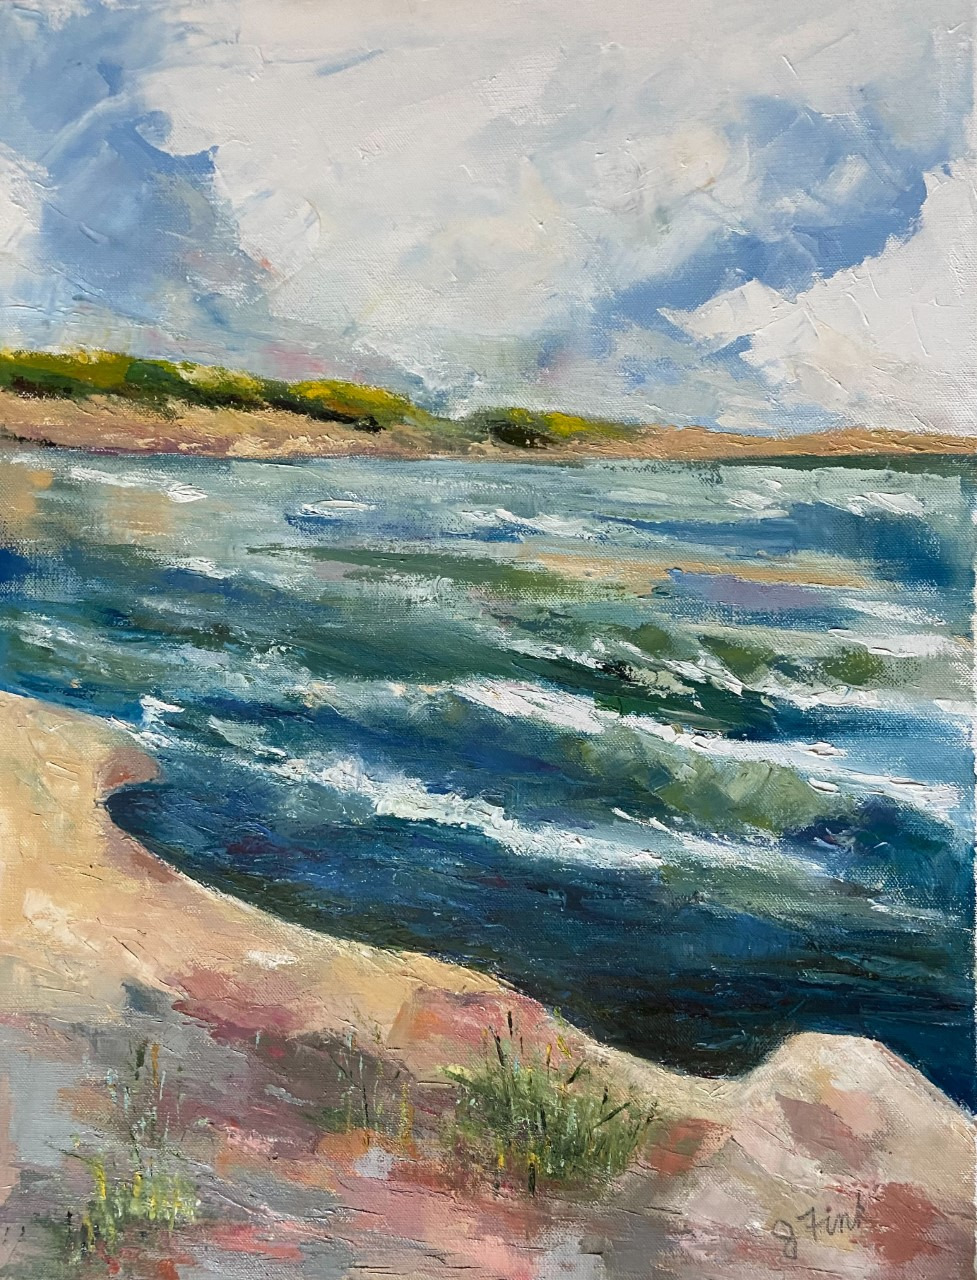 Orient point 24x18 in oil on canvas 225 itfk9f